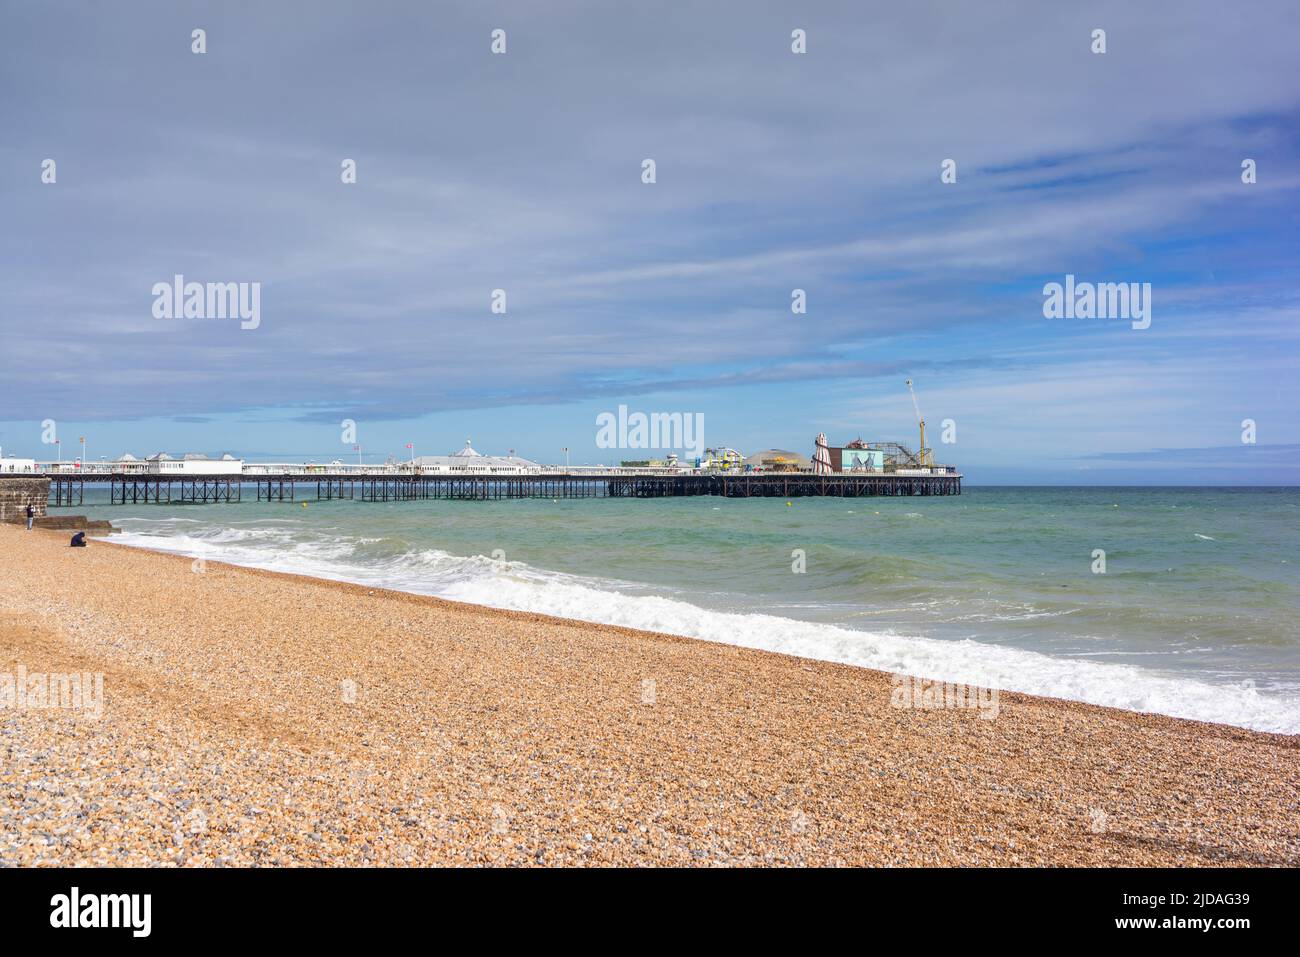 Brighton Palace Pier, Grade II listed pleasure pier at the seafront in Brighton, famous landmark of Brighton, East Sussex, England, UK Stock Photo